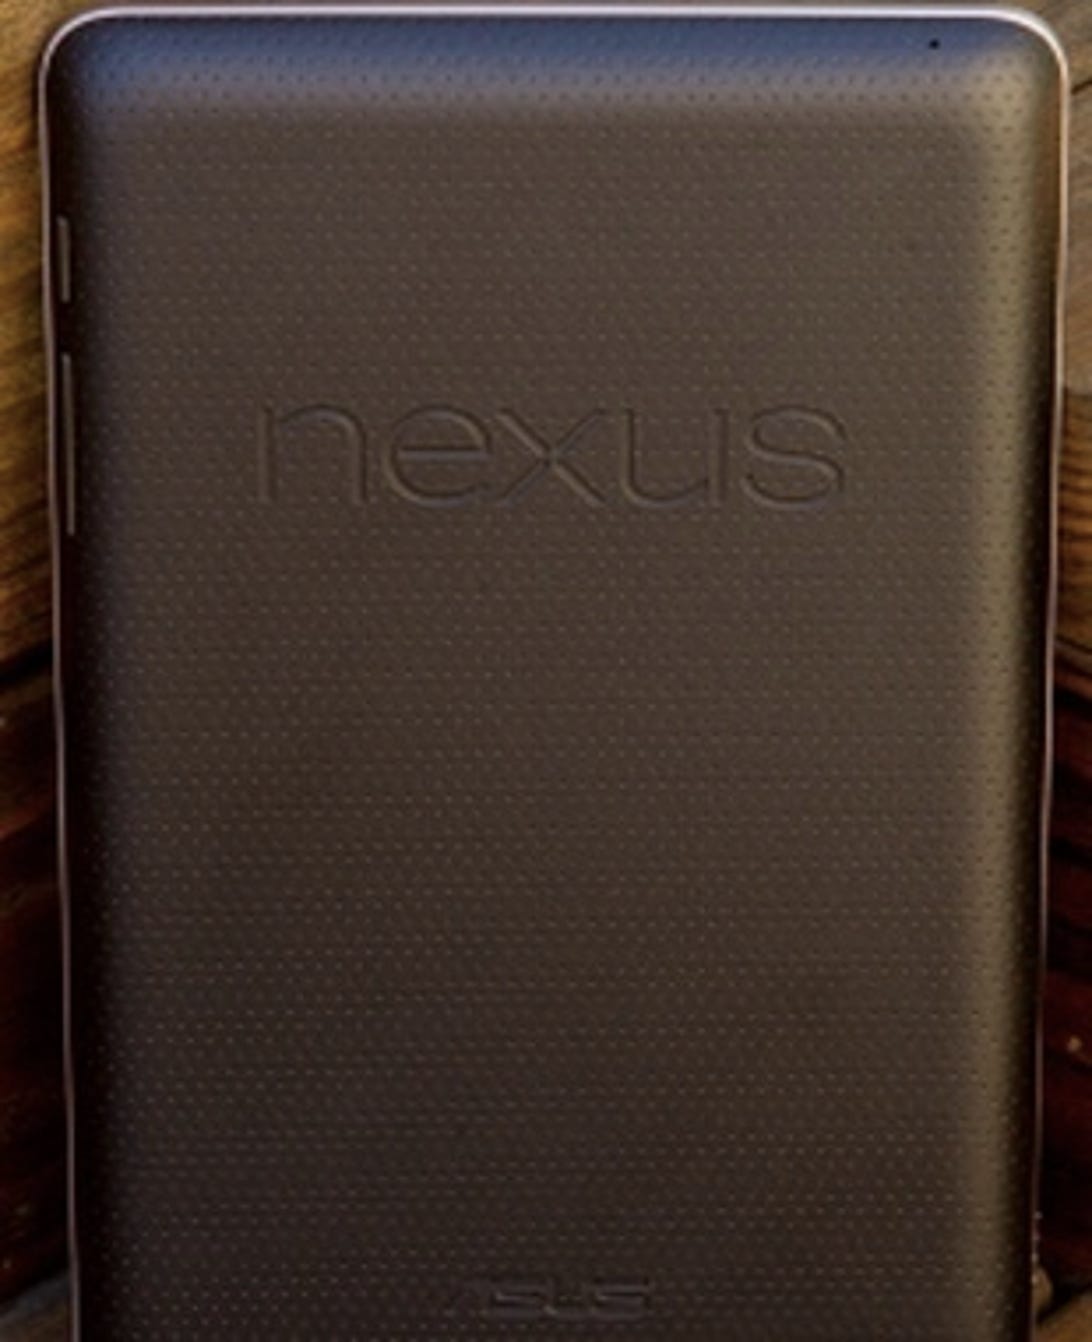 The big question is how many Nexus 7 tablets will Google sell over the coming months.